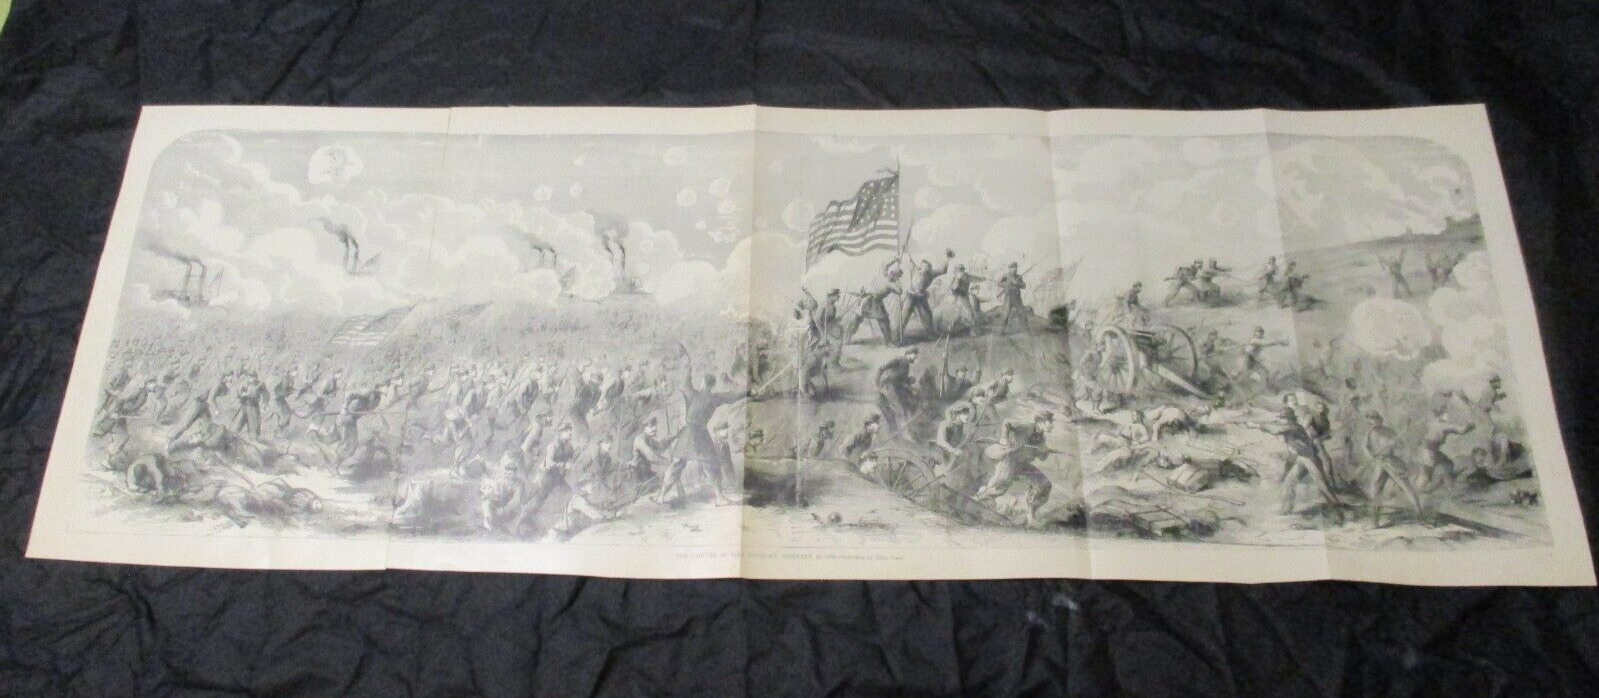 1898 Thomas Nast Civil War Panorama Print - Capture of Fort Donelson, Tennessee